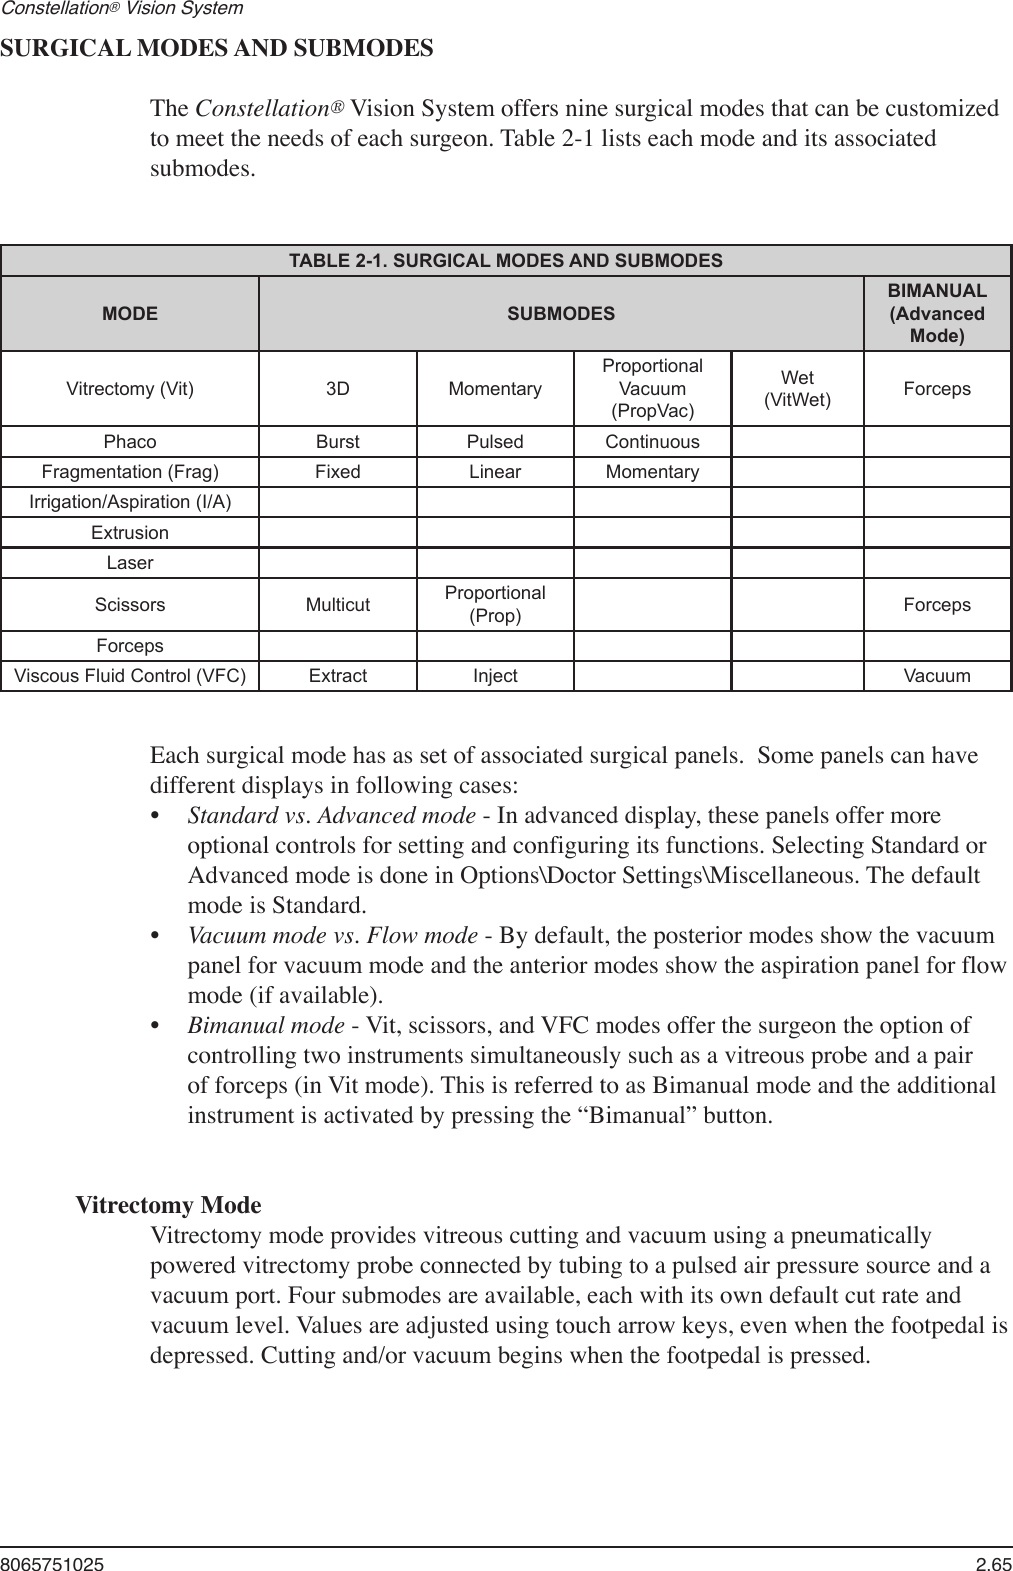 8065751025  2.65Constellation® Vision System SURGICAL MODES AND SUBMODESThe Constellation® Vision System offers nine surgical modes that can be customized to meet the needs of each surgeon. Table 2-1 lists each mode and its associated submodes.TABLE 2-1. SURGICAL MODES AND SUBMODESMODE SUBMODESBIMANUAL(AdvancedMode)Vitrectomy (Vit) 3D MomentaryProportional Vacuum (PropVac)Wet(VitWet) ForcepsPhaco Burst Pulsed ContinuousFragmentation (Frag) Fixed Linear MomentaryIrrigation/Aspiration (I/A)ExtrusionLaserScissors Multicut Proportional (Prop) ForcepsForcepsViscous Fluid Control (VFC) Extract Inject VacuumEach surgical mode has as set of associated surgical panels.  Some panels can have different displays in following cases:Standard vs. Advanced mode - In advanced display, these panels offer more optional controls for setting and configuring its functions. Selecting Standard or Advanced mode is done in Options\Doctor Settings\Miscellaneous. The default mode is Standard.Vacuum mode vs. Flow mode - By default, the posterior modes show the vacuum panel for vacuum mode and the anterior modes show the aspiration panel for flow mode (if available).Bimanual mode - Vit, scissors, and VFC modes offer the surgeon the option of controlling two instruments simultaneously such as a vitreous probe and a pair of forceps (in Vit mode). This is referred to as Bimanual mode and the additional instrument is activated by pressing the “Bimanual” button.Vitrectomy ModeVitrectomy mode provides vitreous cutting and vacuum using a pneumatically powered vitrectomy probe connected by tubing to a pulsed air pressure source and a vacuum port. Four submodes are available, each with its own default cut rate andvacuum level. Values are adjusted using touch arrow keys, even when the footpedal isdepressed. Cutting and/or vacuum begins when the footpedal is pressed. •••